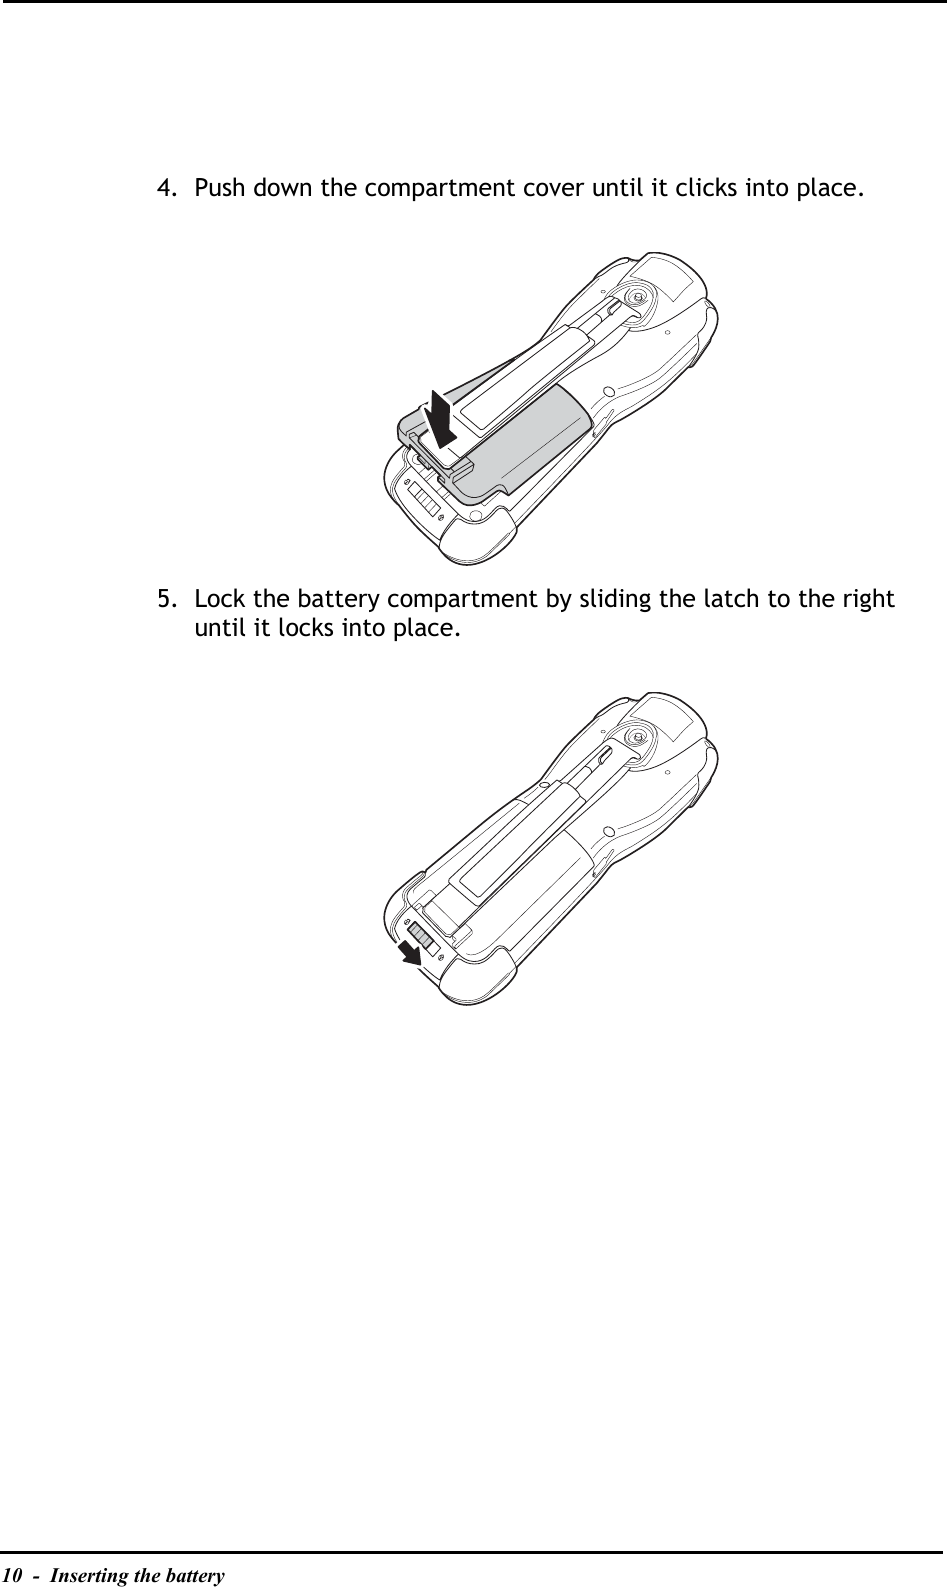 10  -  Inserting the battery4. Push down the compartment cover until it clicks into place.5. Lock the battery compartment by sliding the latch to the right until it locks into place.